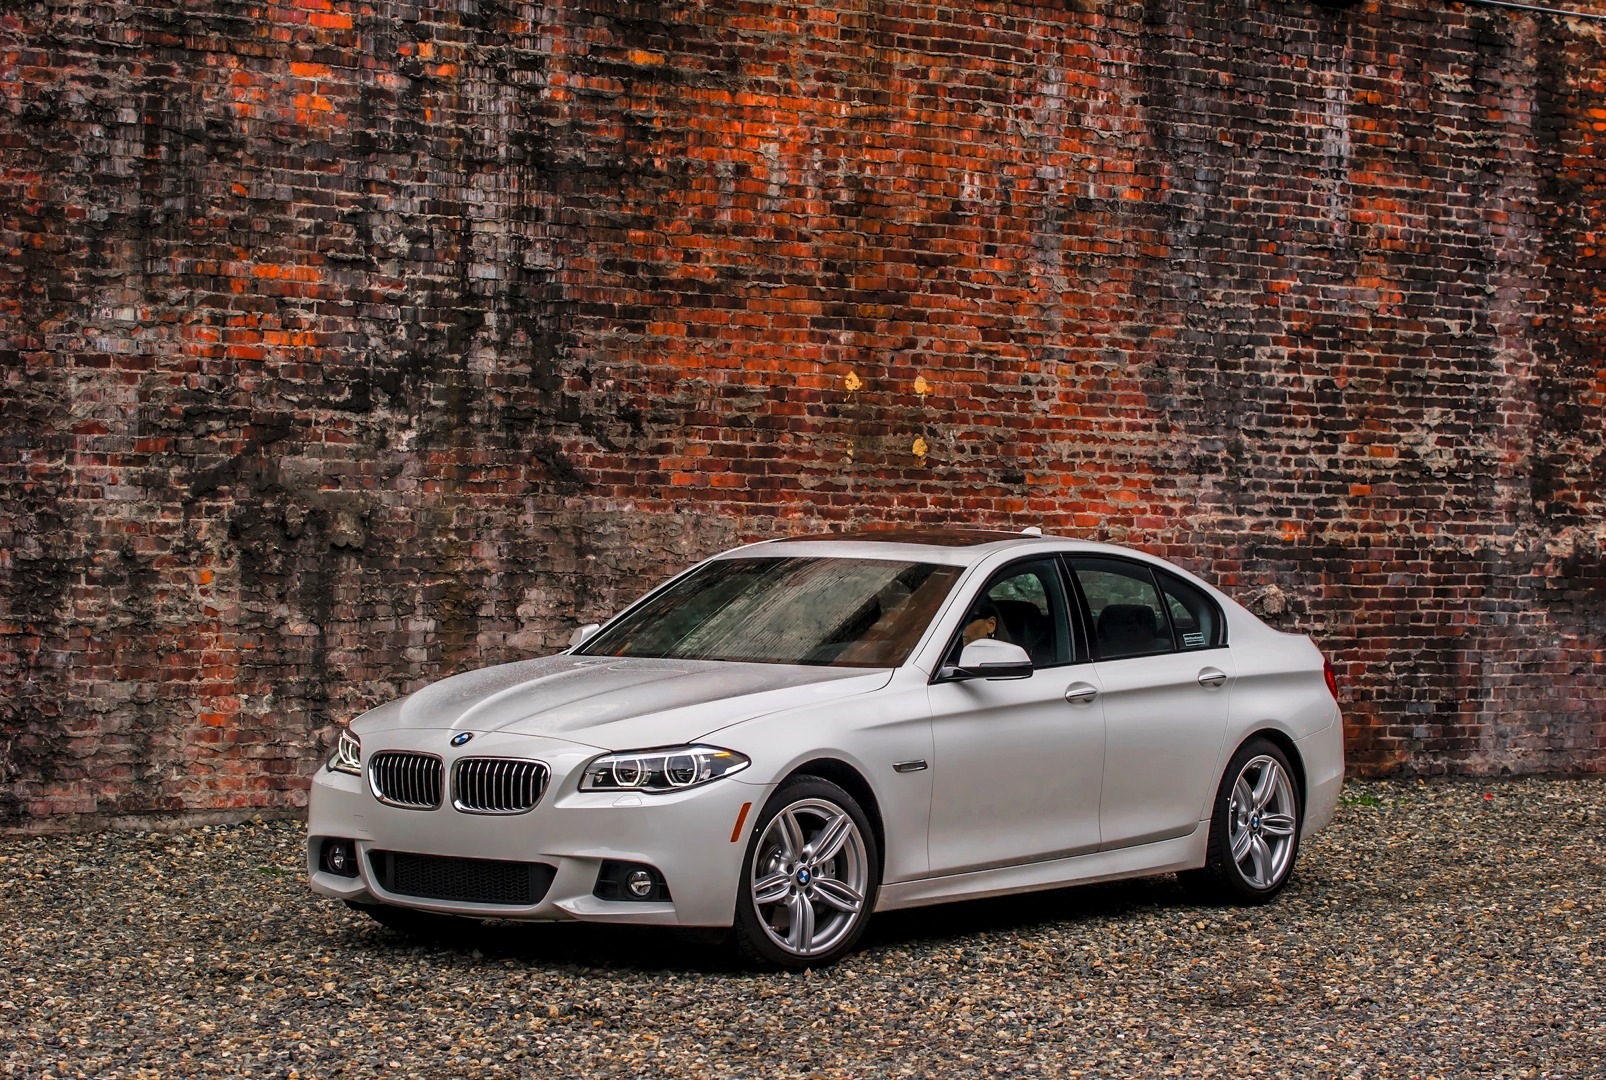 2014-bmw-5-series-lci-officially-launched-in-north-america-photo-gallery_4.jpg